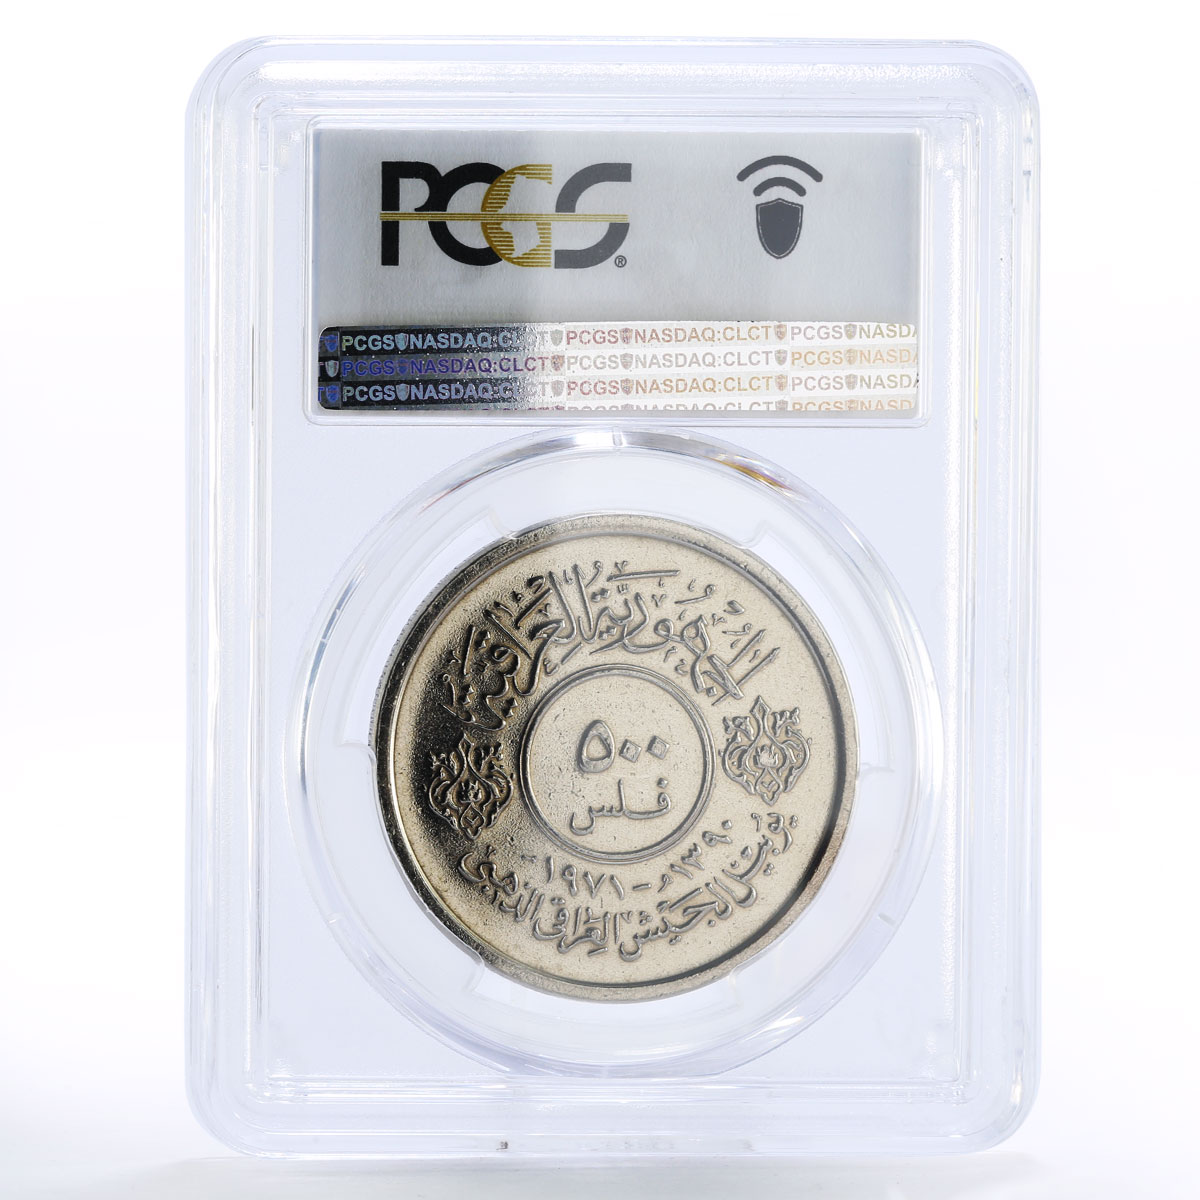 Iraq 500 fils 50th Anniversary of Army MS63 PCGS nickel coin 1971